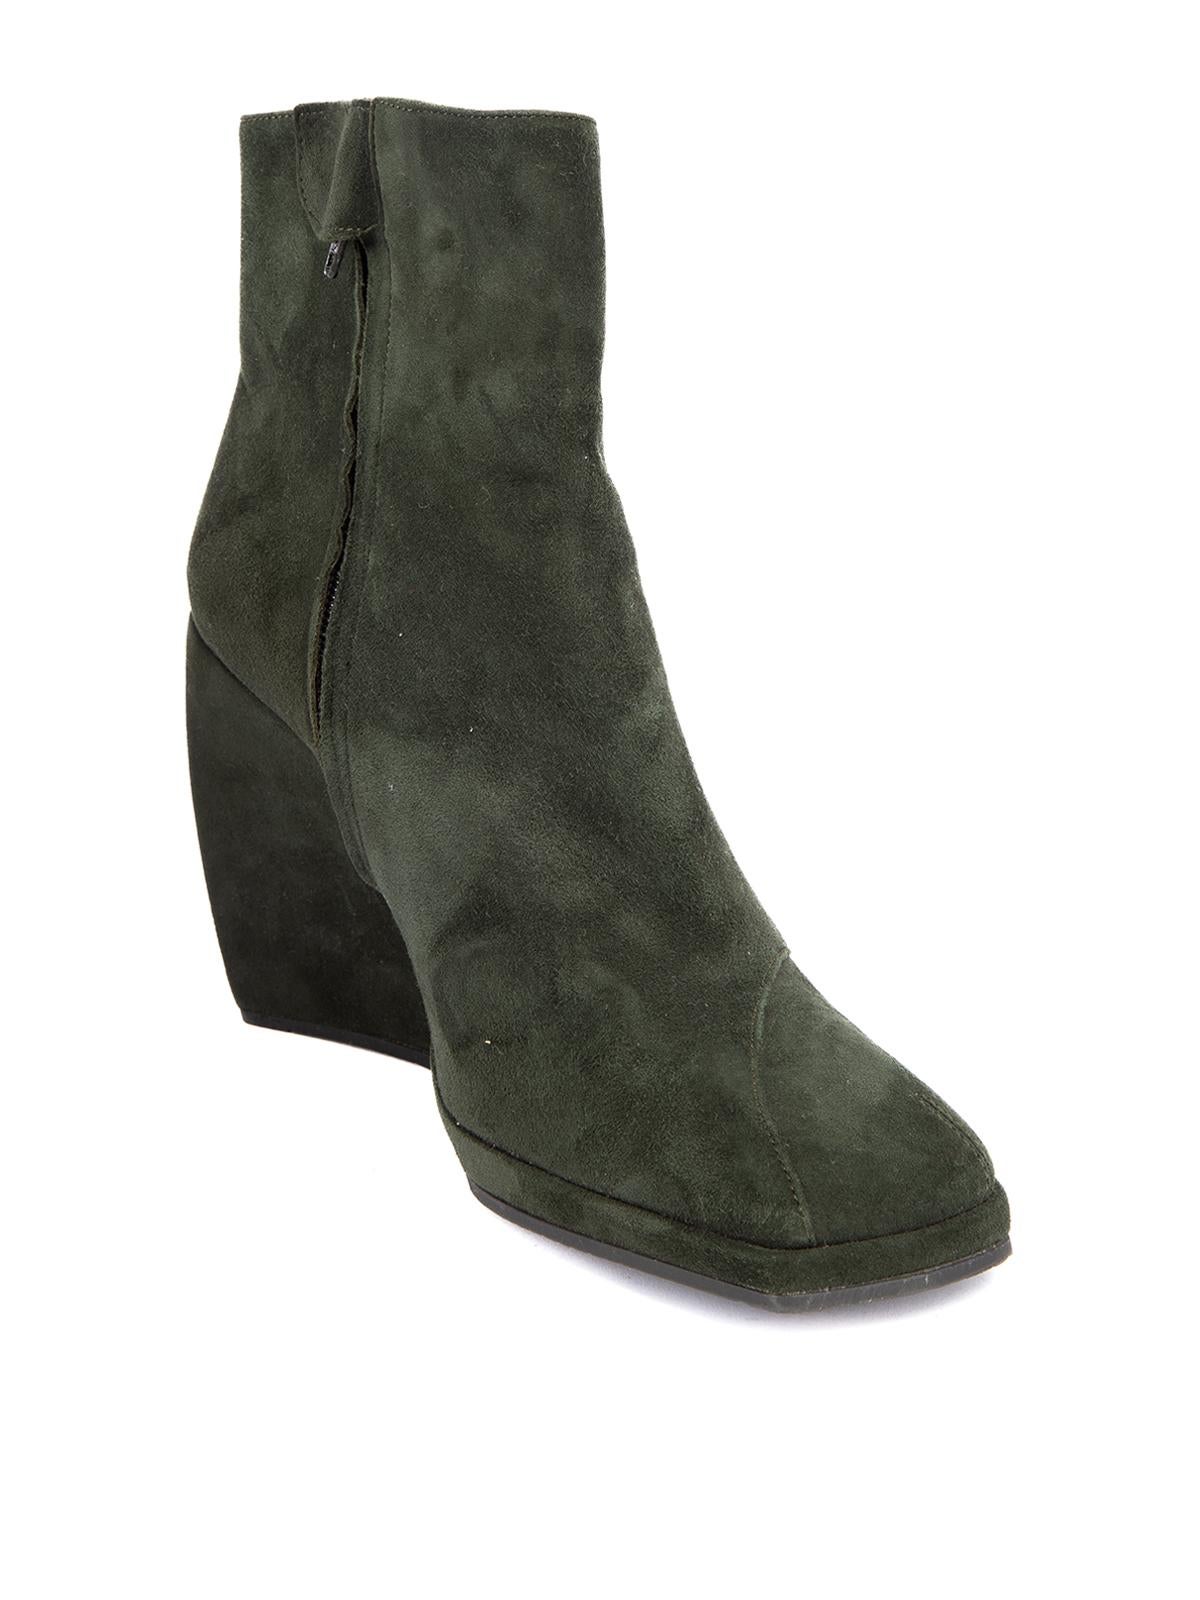 CONDITION is Very good. Minimal wear to heels is evident. Minimal wear to suede exterior on this used Stephane Kélian designer resale item. Details Green Suede Ankle boots Square toe Wedge heel Side zip closure with snap button Leather interior Made